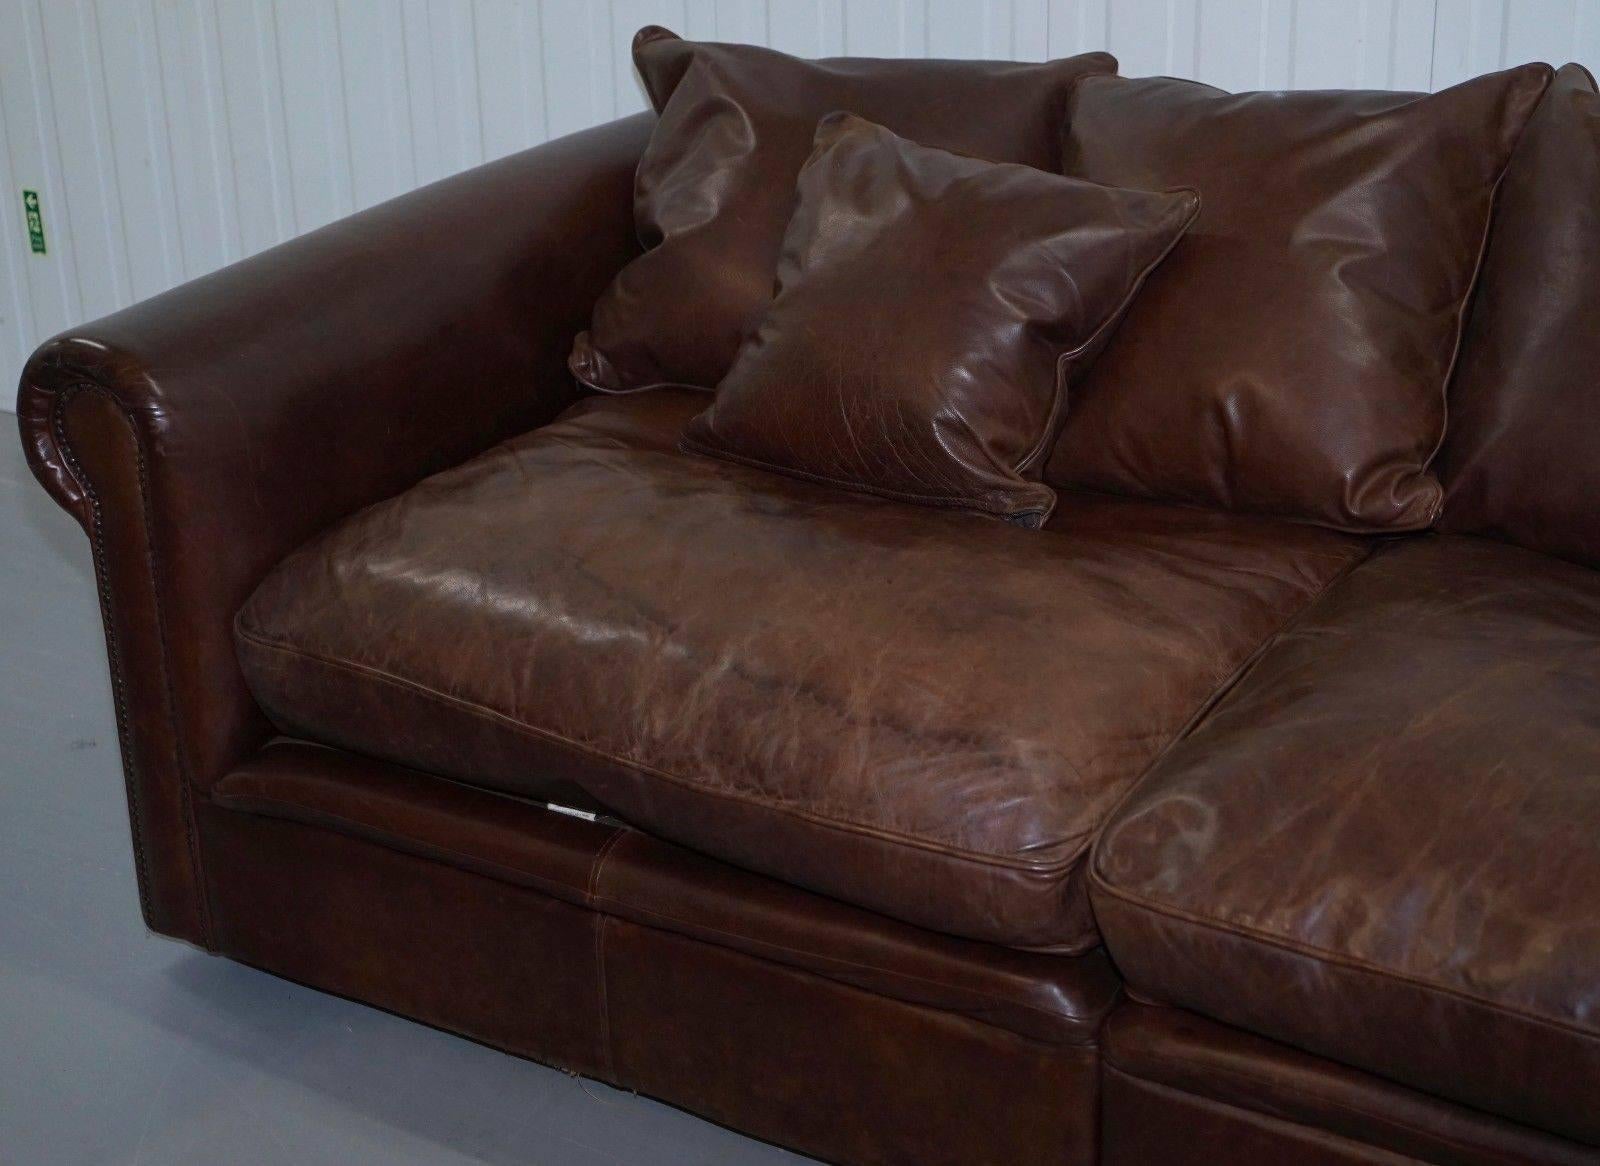 We are delighted to offer for sale this lovely very large heritage brown leather Knightsbridge sofa by Collin & Hayes RRP £3999 with deep feather filled cushions

This sofa is massive, it's not only wide but enormously deep, its 124cm front to